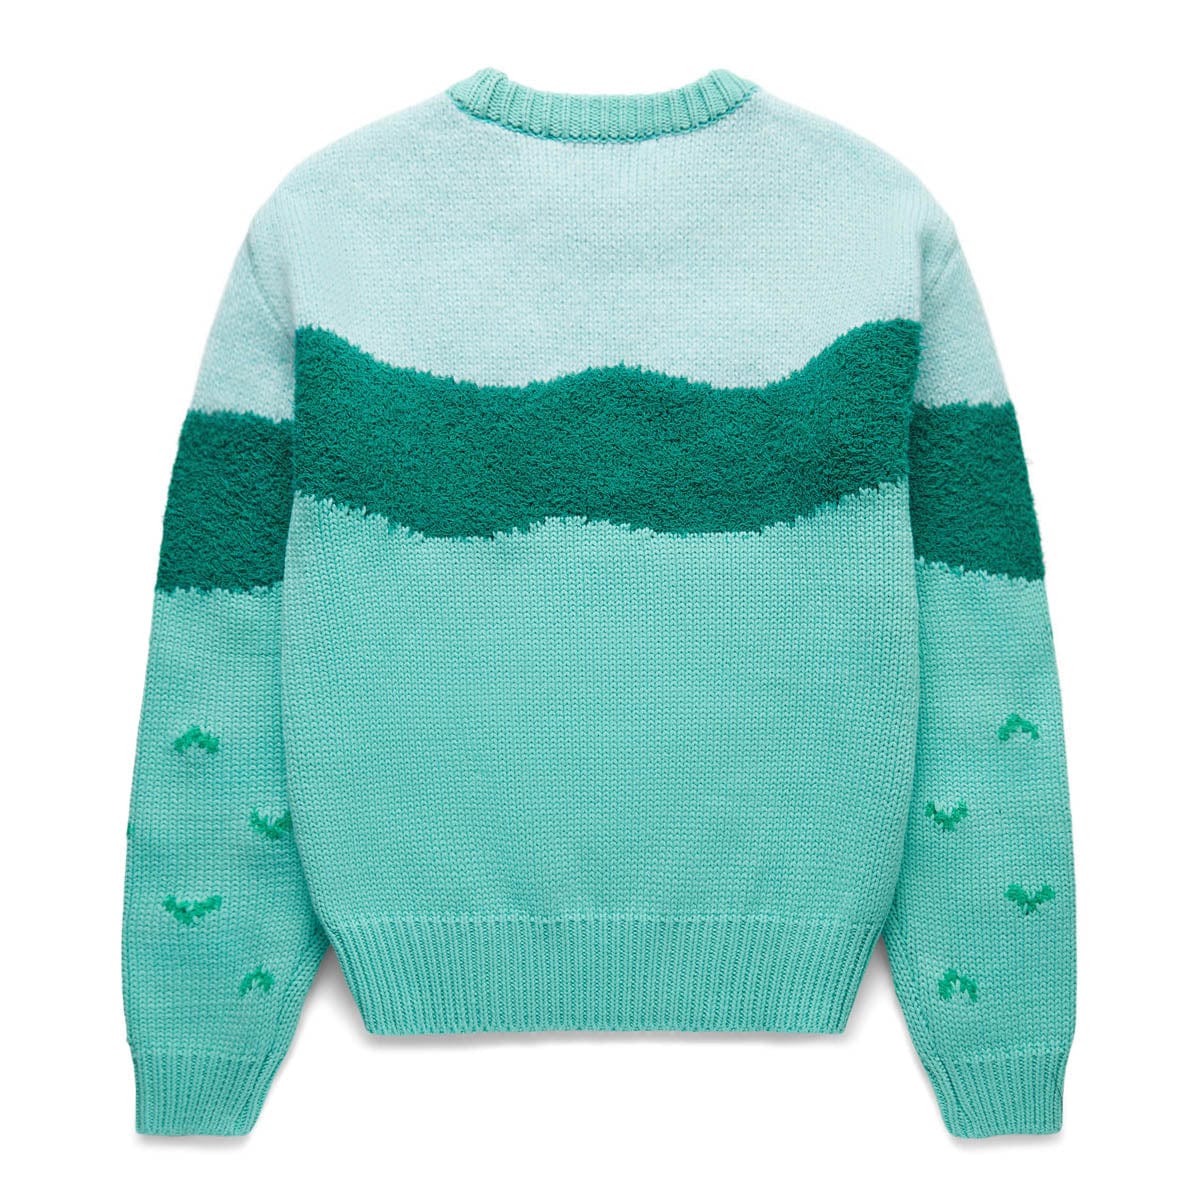 Ada Floral Intarsia Knitted Sweater - Minty Green